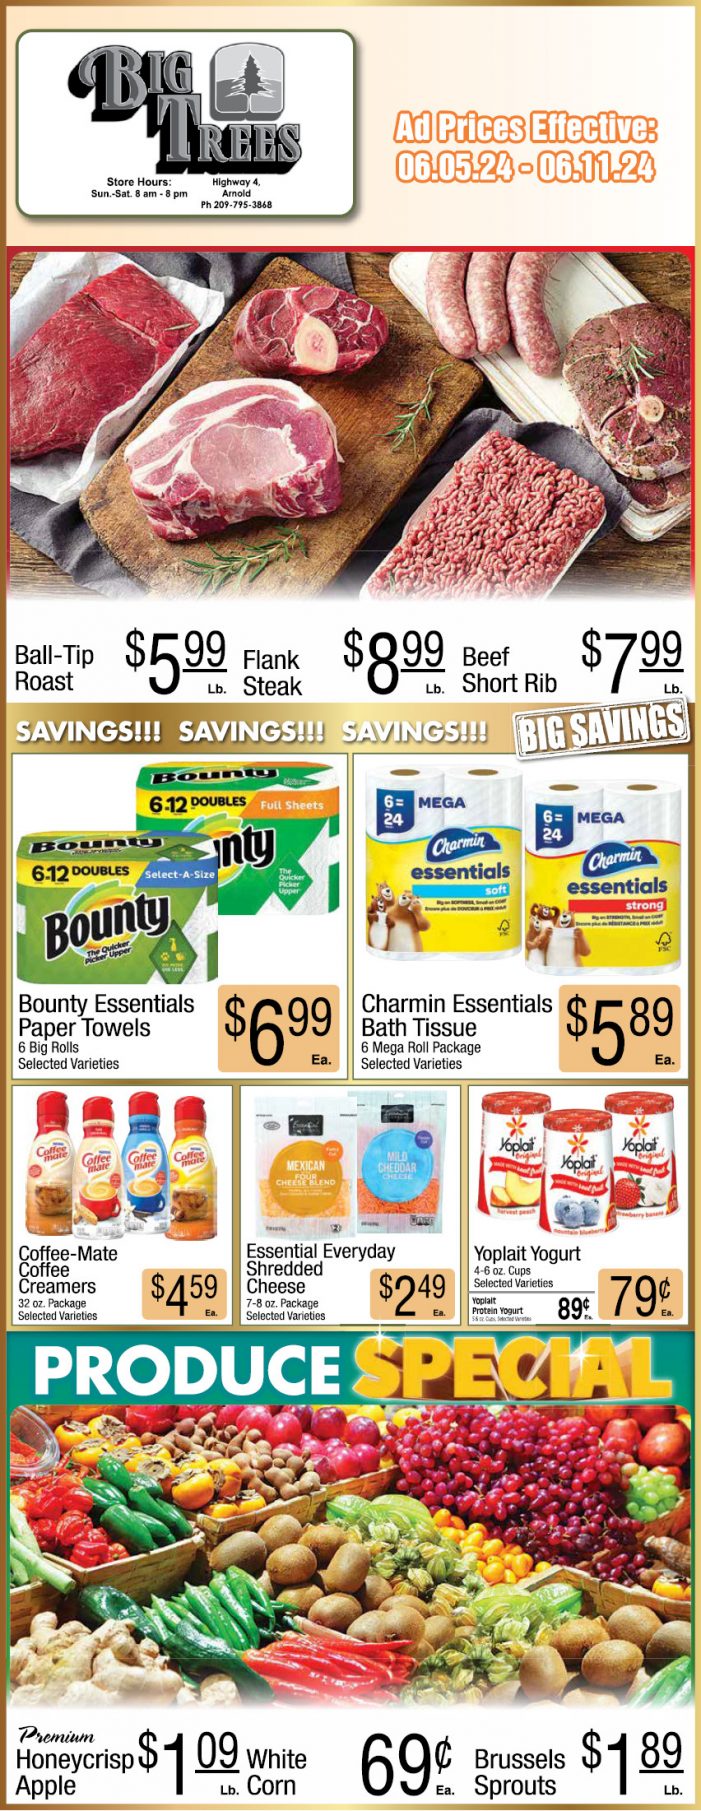 Big Trees Market Weekly Ad, Grocery, Produce, Meat & Deli Specials Through June 11th! Shop Local & Save!